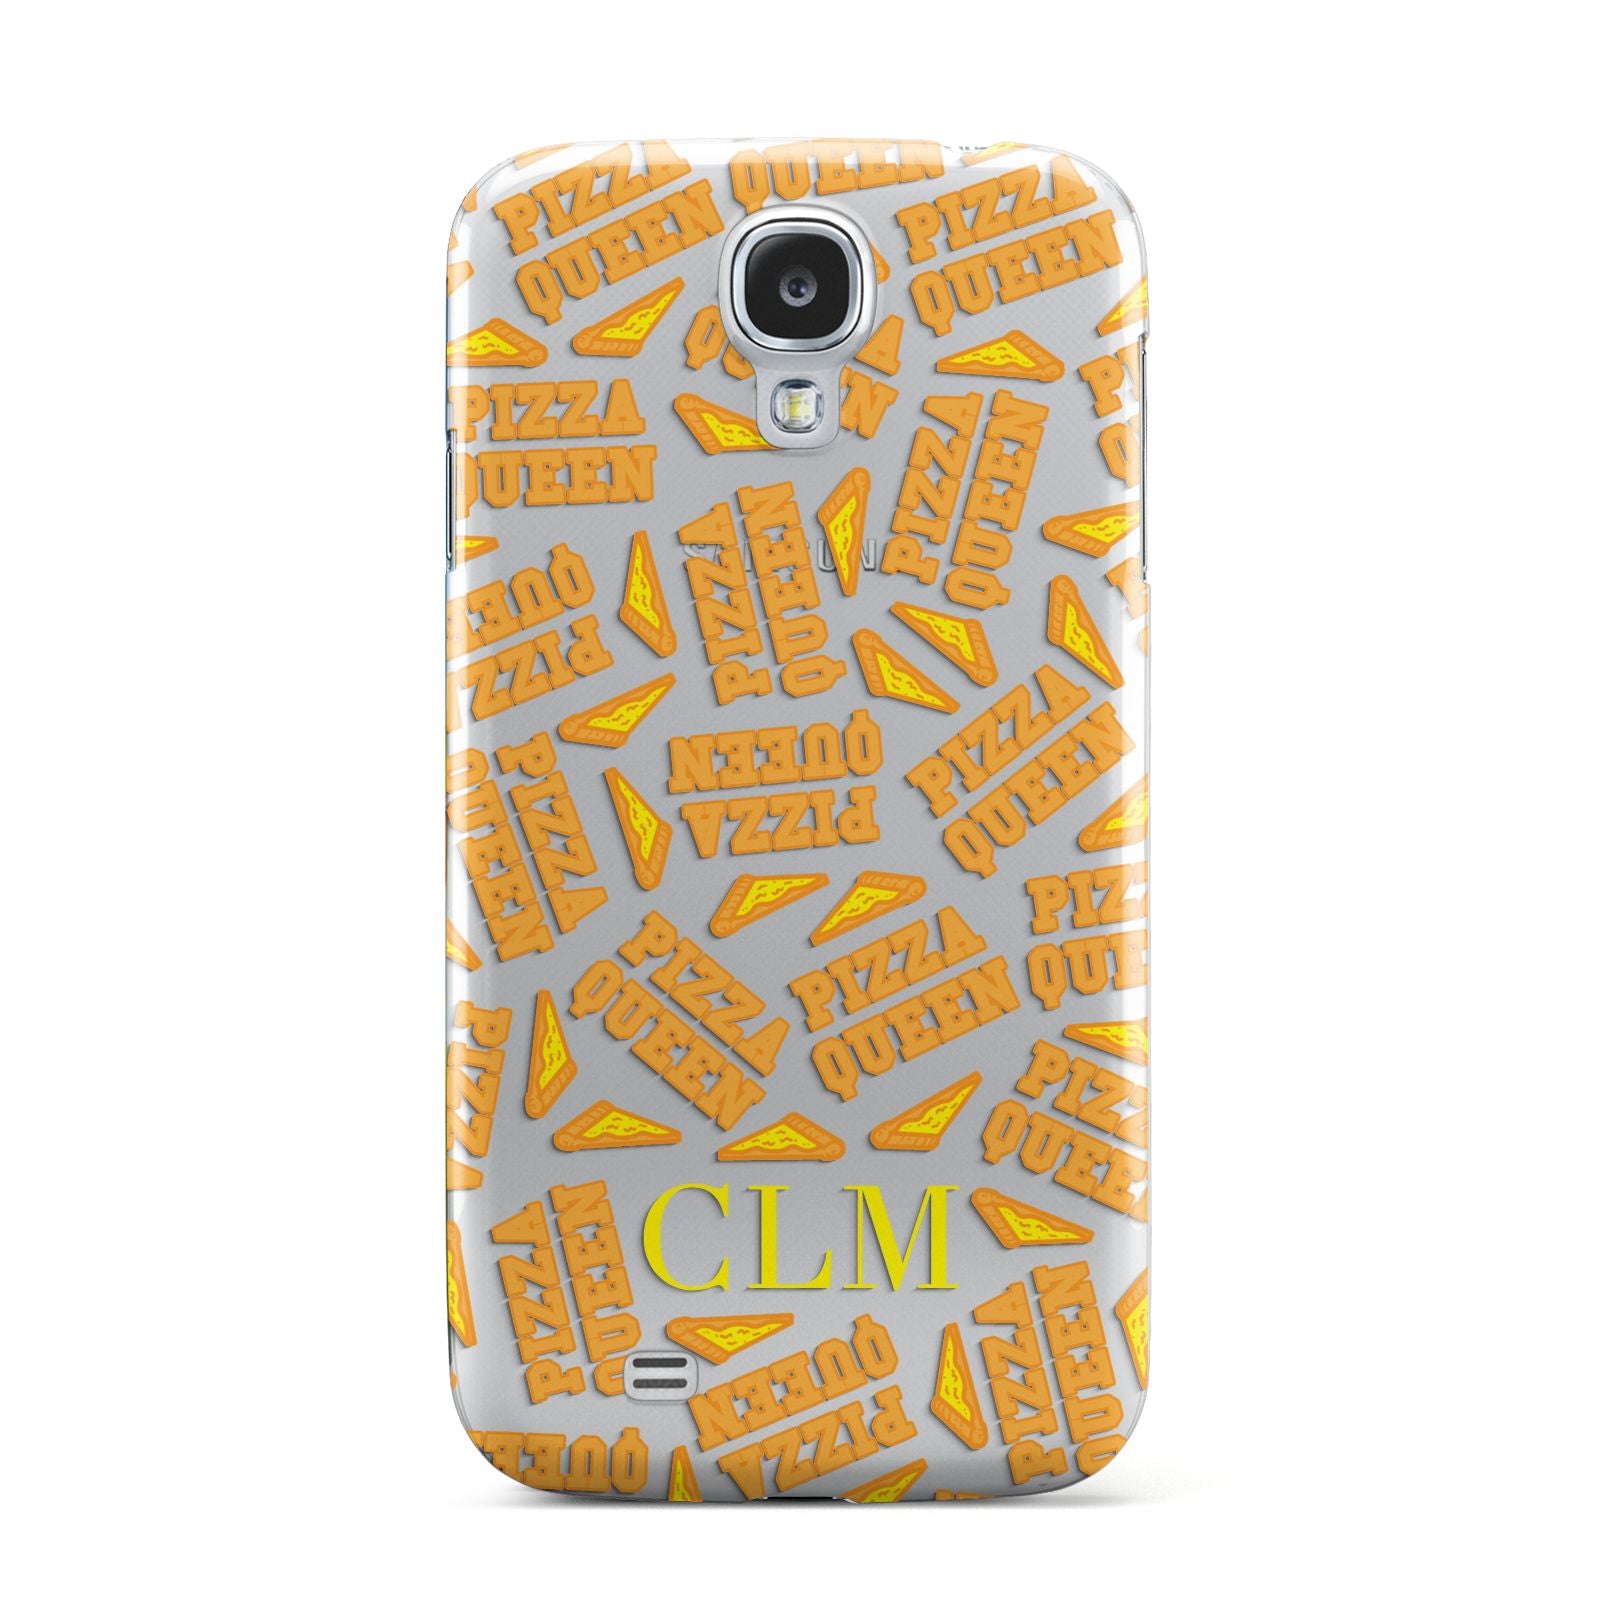 Personalised Pizza Queen Initials Samsung Galaxy S4 Case